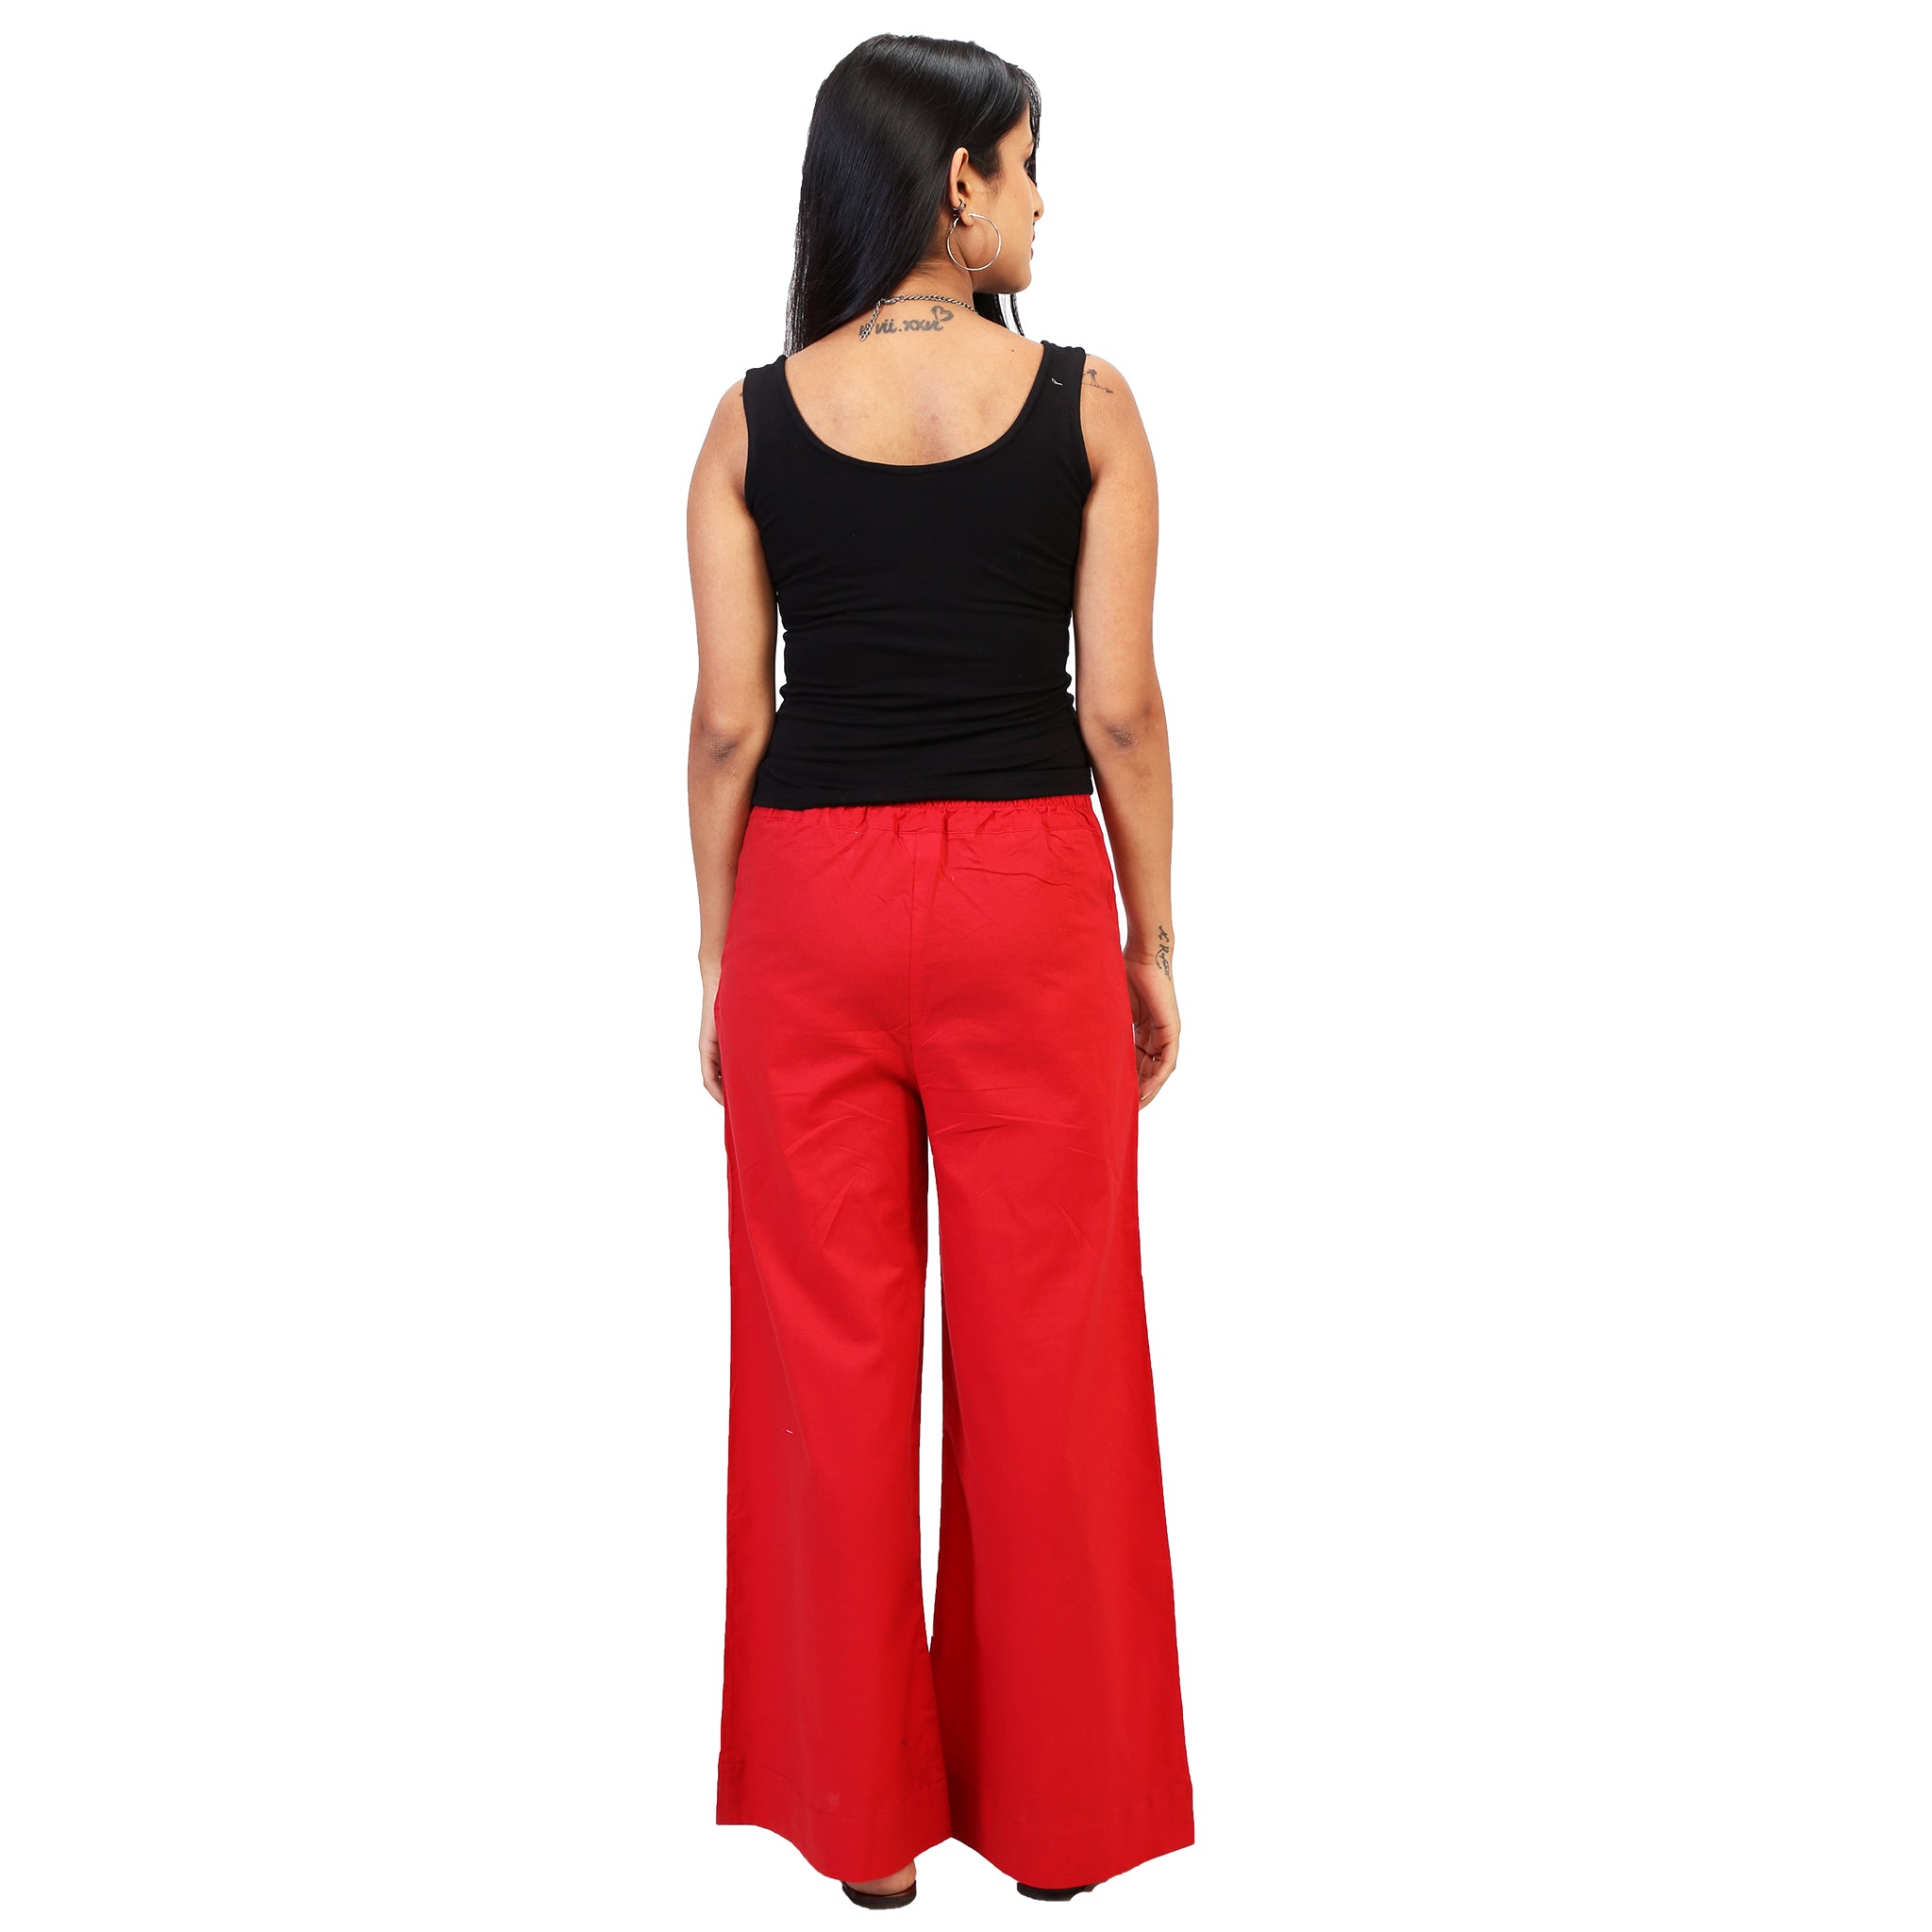 Subh Laaxmi Palazzo Pant Regular Fit, Relaxed Women Multicolor Trousers -  Buy Subh Laaxmi Palazzo Pant Regular Fit, Relaxed Women Multicolor Trousers  Online at Best Prices in India | Flipkart.com